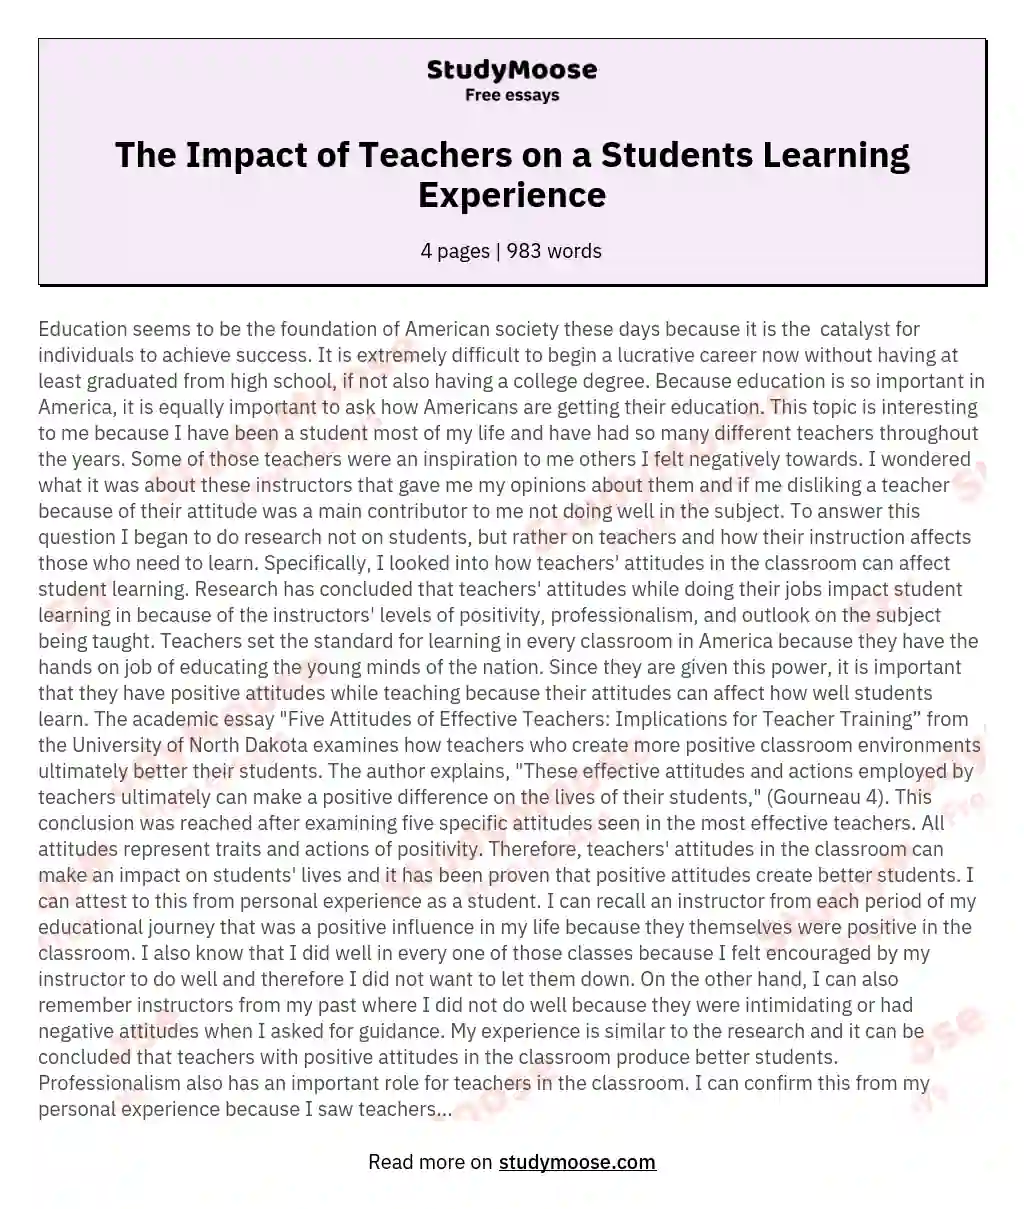 The Impact of Teachers on a Students Learning Experience essay